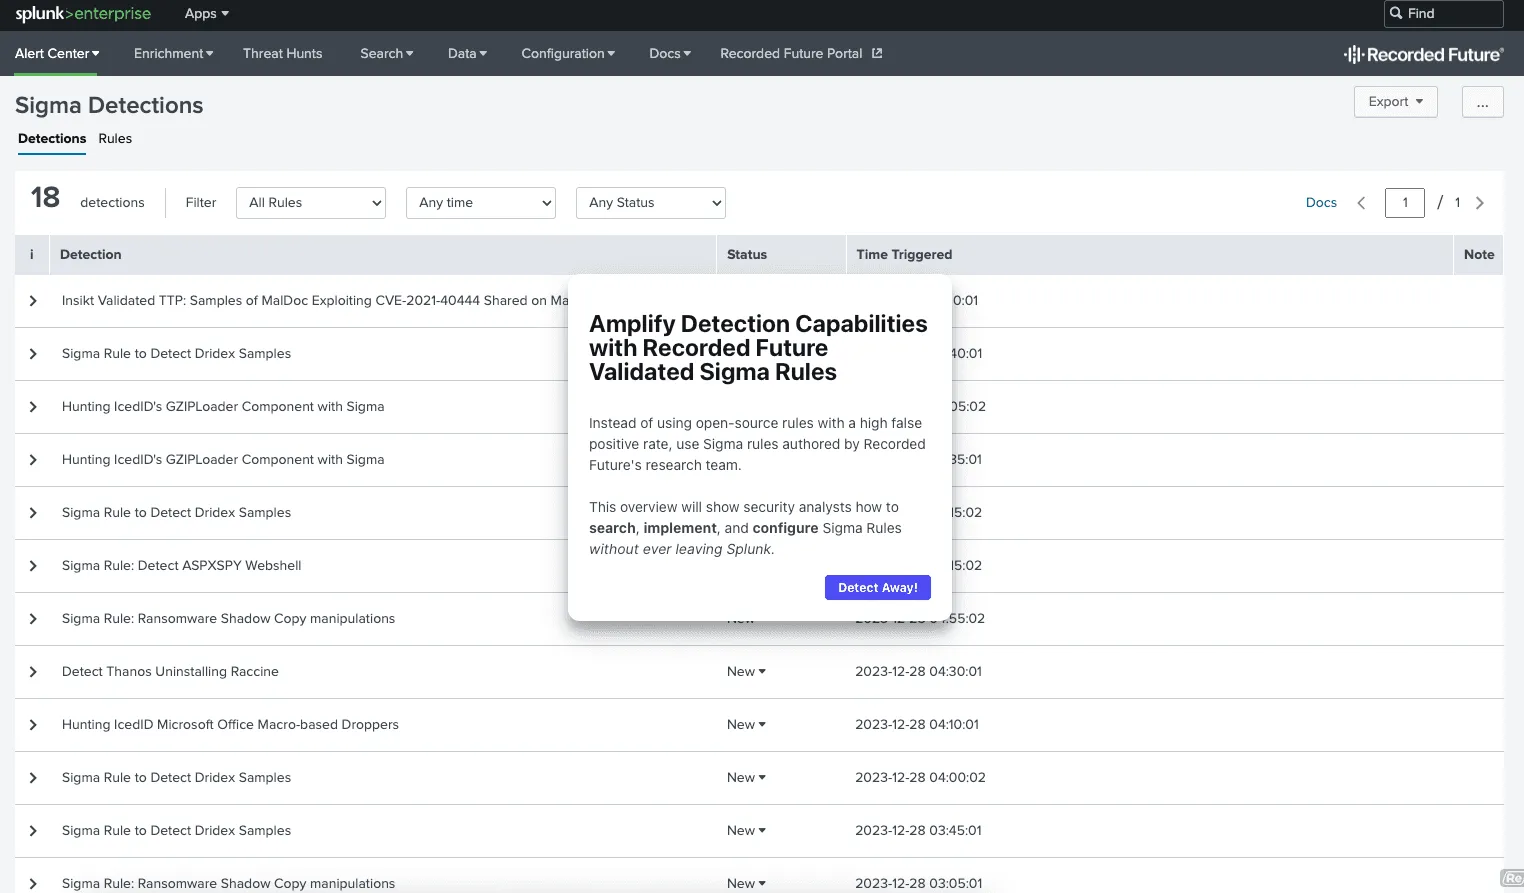 Amplify Detection Capabilities with Recorded Future Validated Sigma Rules